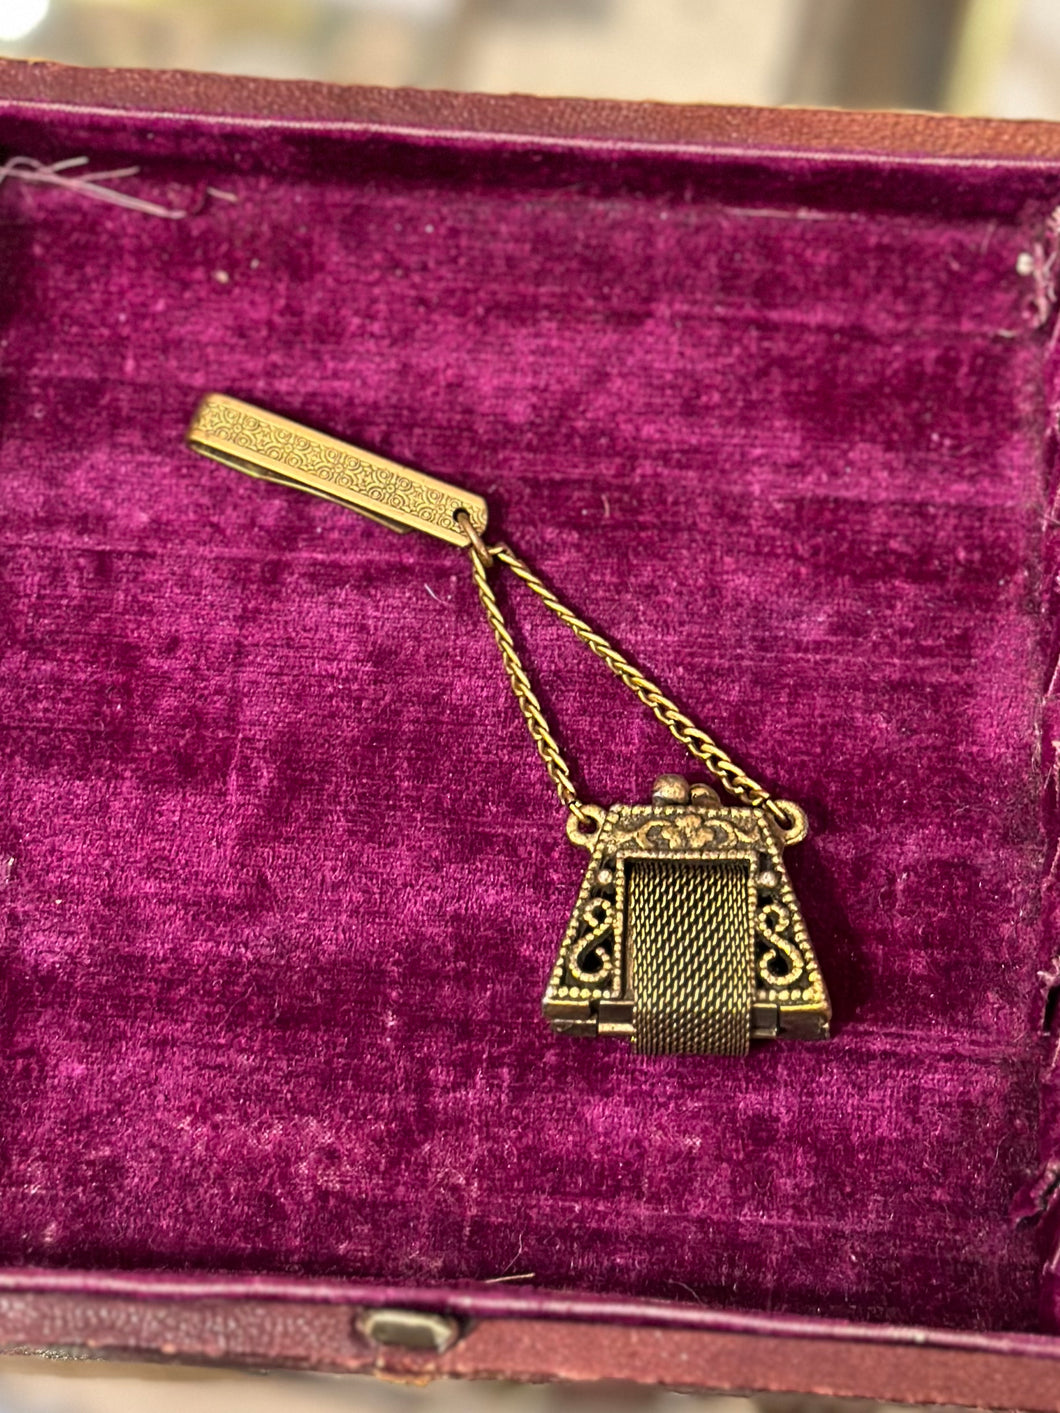 Vintage 1950s Chatelaine Brass Chain Kiss Lock Opening Purse Charm for Belt Victorian Revival